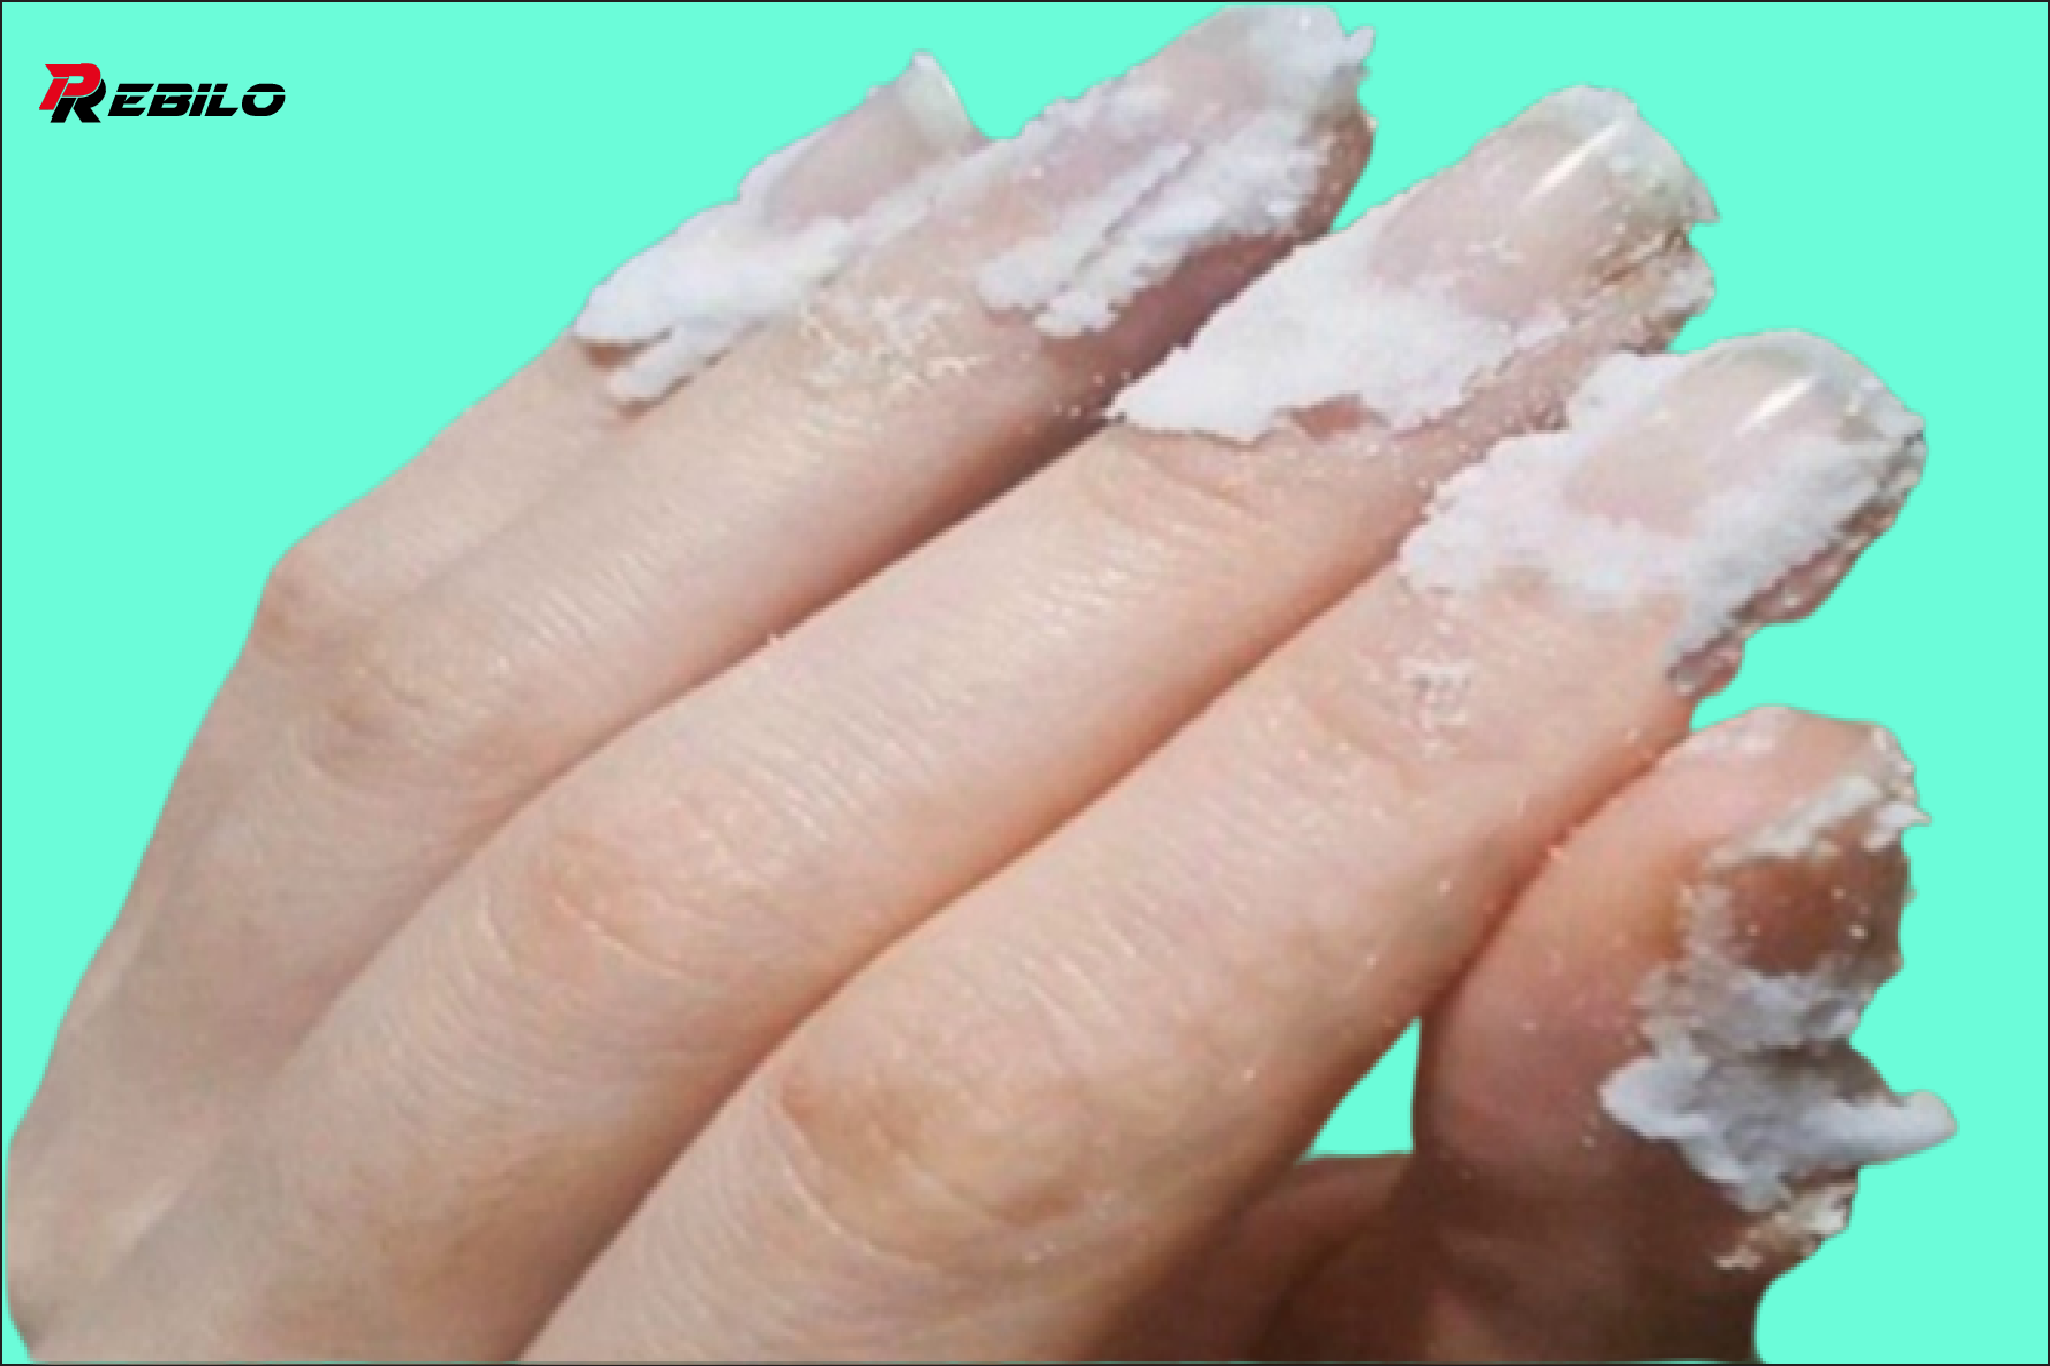 Rub some baking soda on your nails and see what happens? This trick will change your life